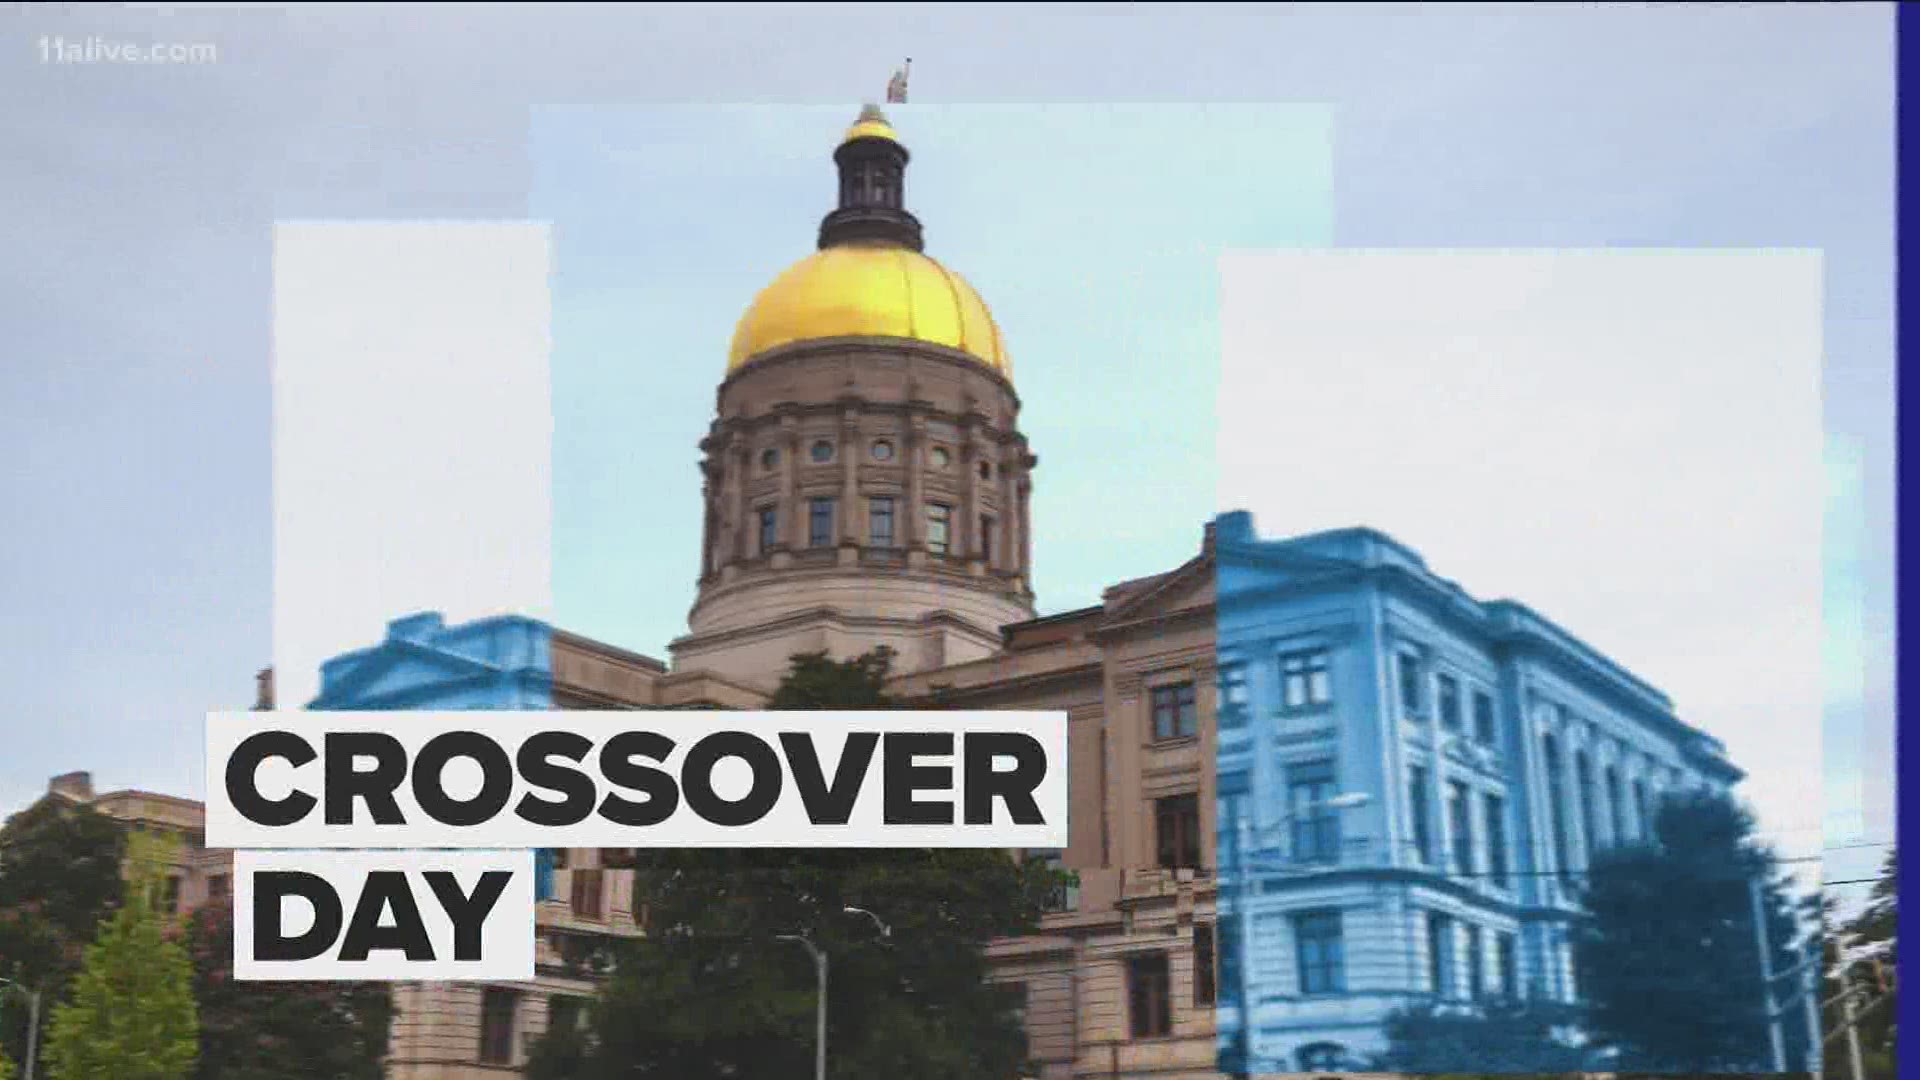 It's crossover day in the General Assembly, when bills and other measures are required to pass in the House or Senate and move on to the other chamber.